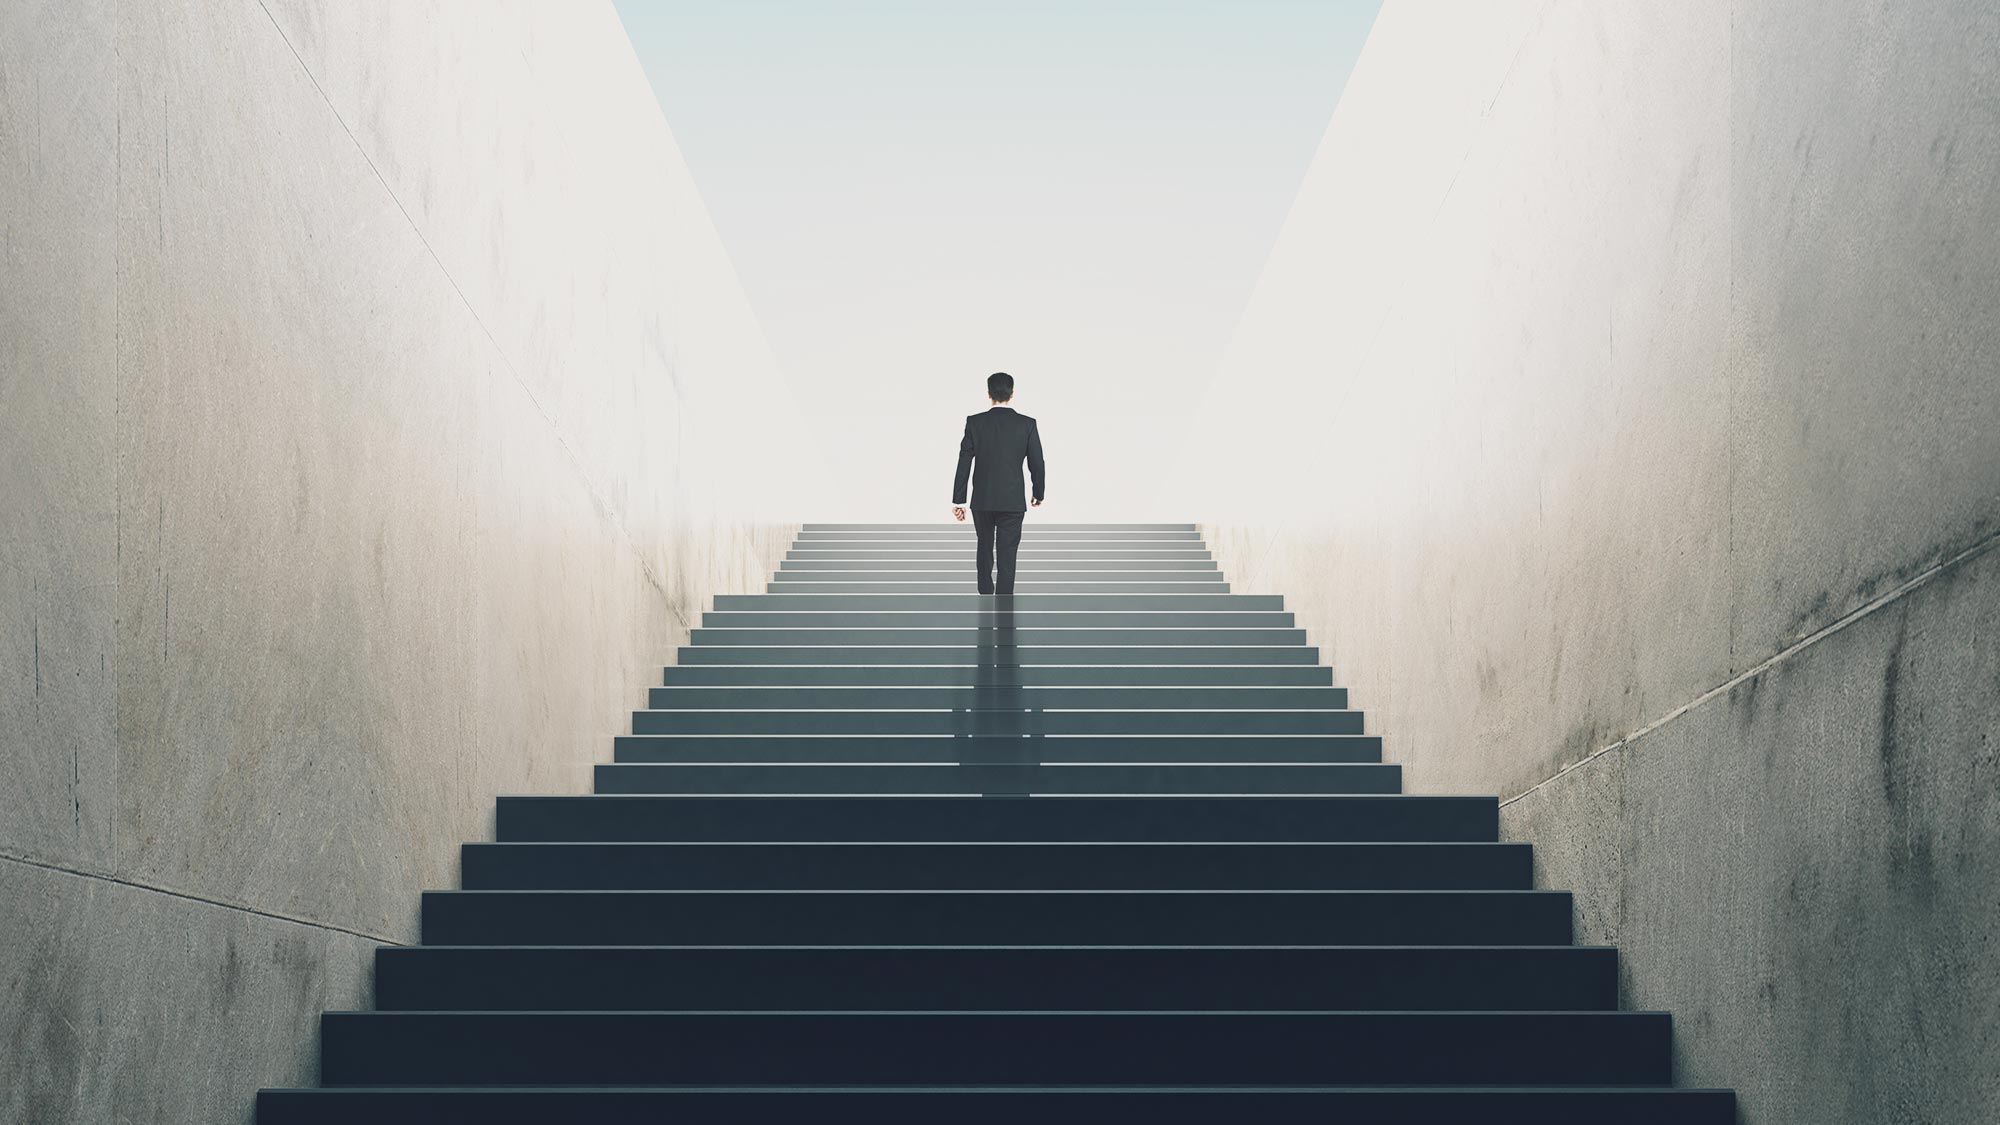 Professional Male In A Dark Suite, Walking Up A Tall Staircase